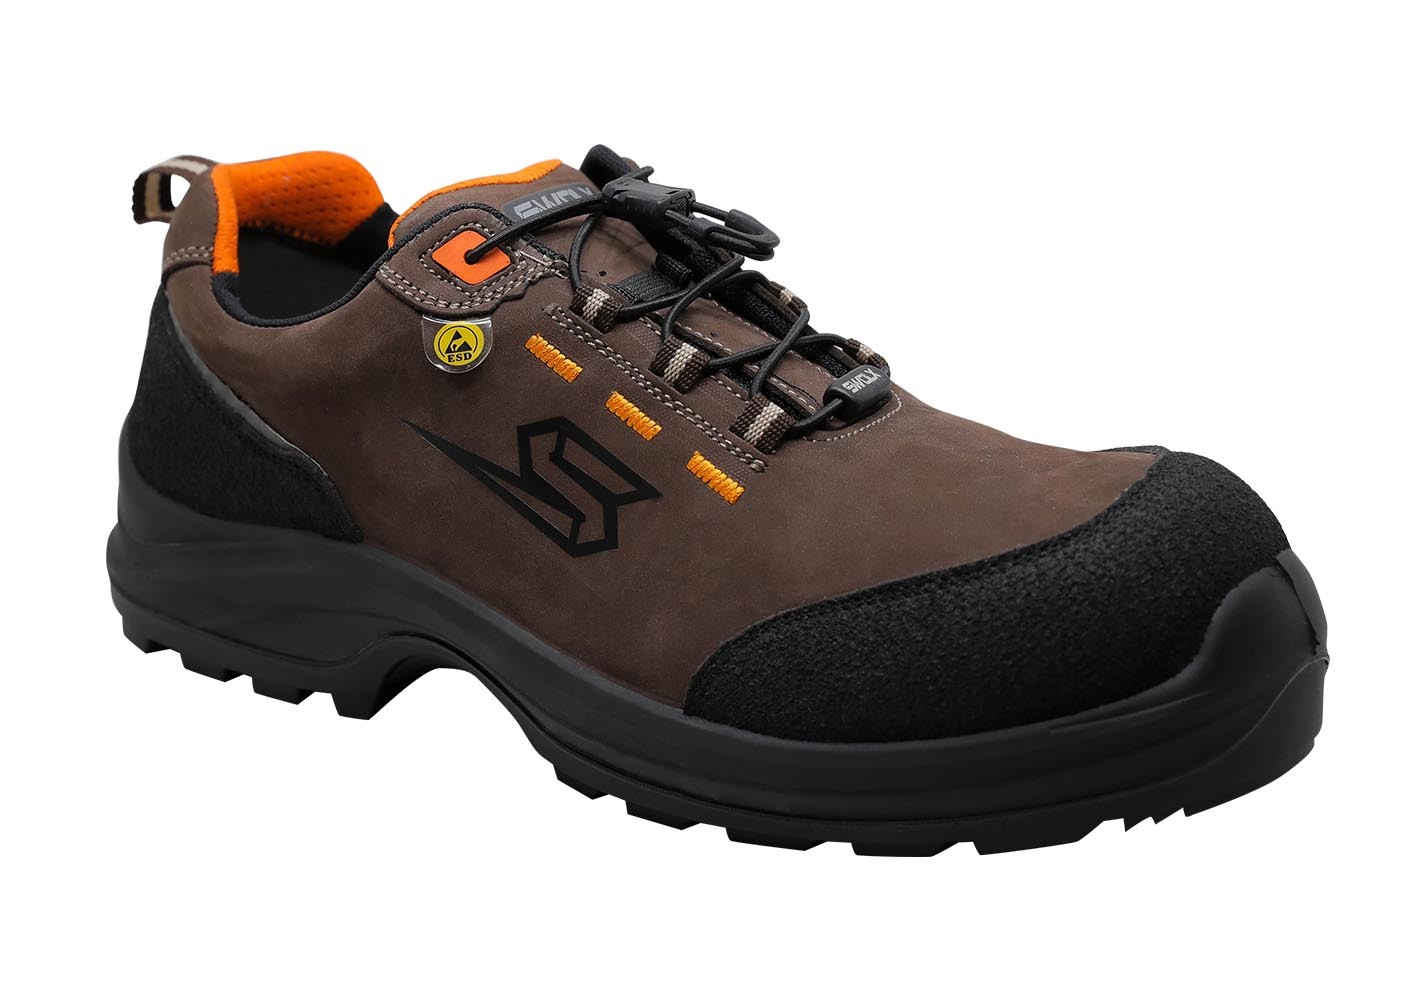 ESD Antistatic Work Safety Shoes Standard Unisex Unisex Brown 9001SWESDBRW